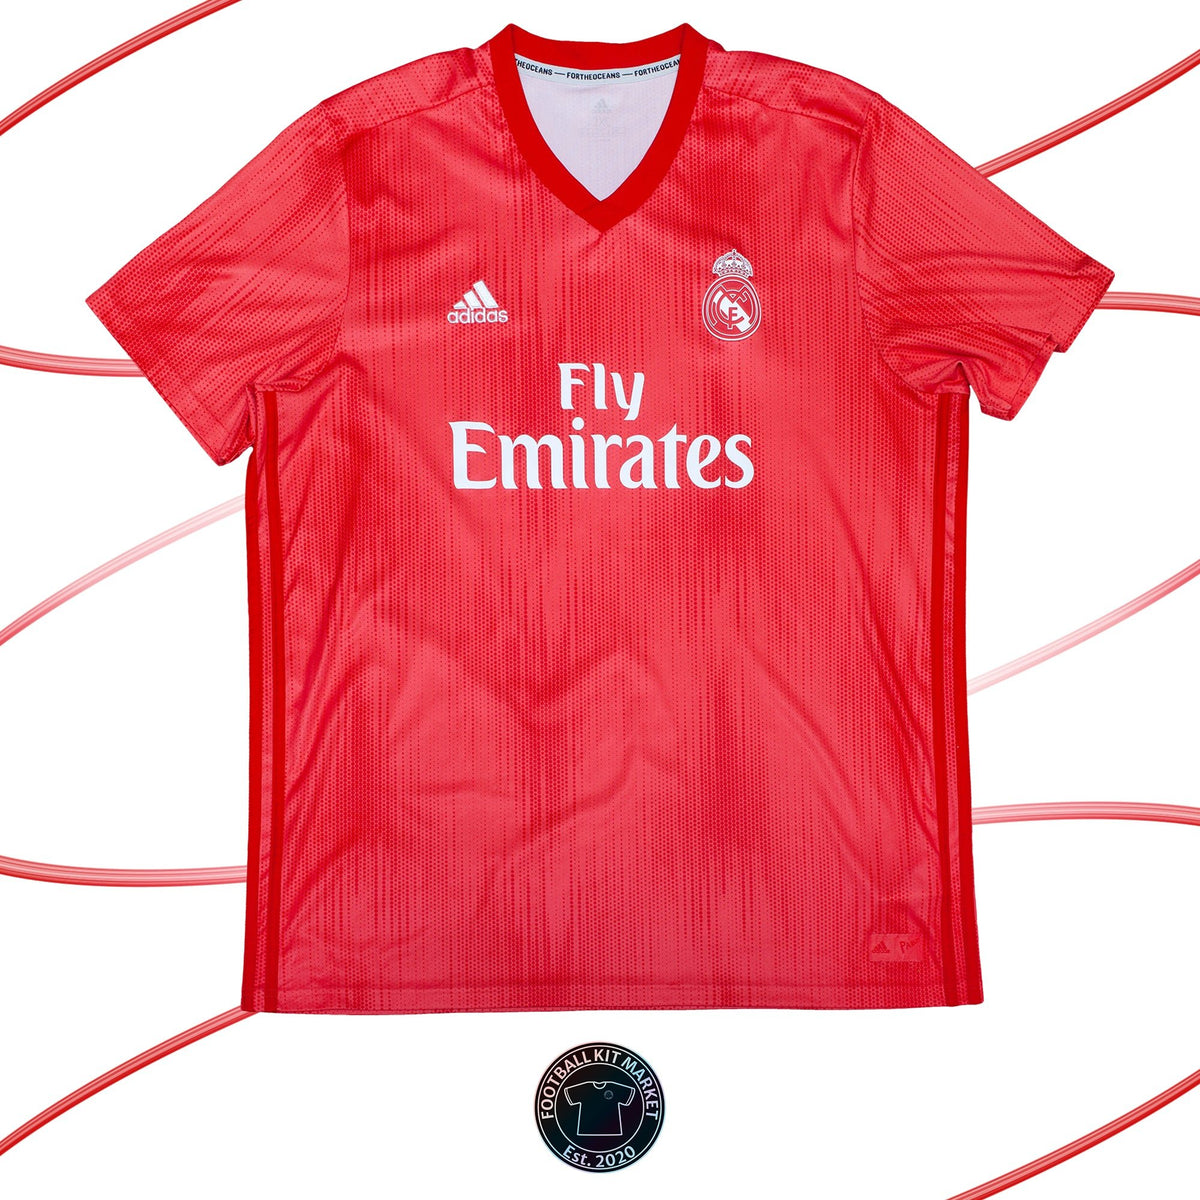 Genuine REAL MADRID 3rd Shirt (2018-2019) - ADIDAS (XXL) - Product Image from Football Kit Market